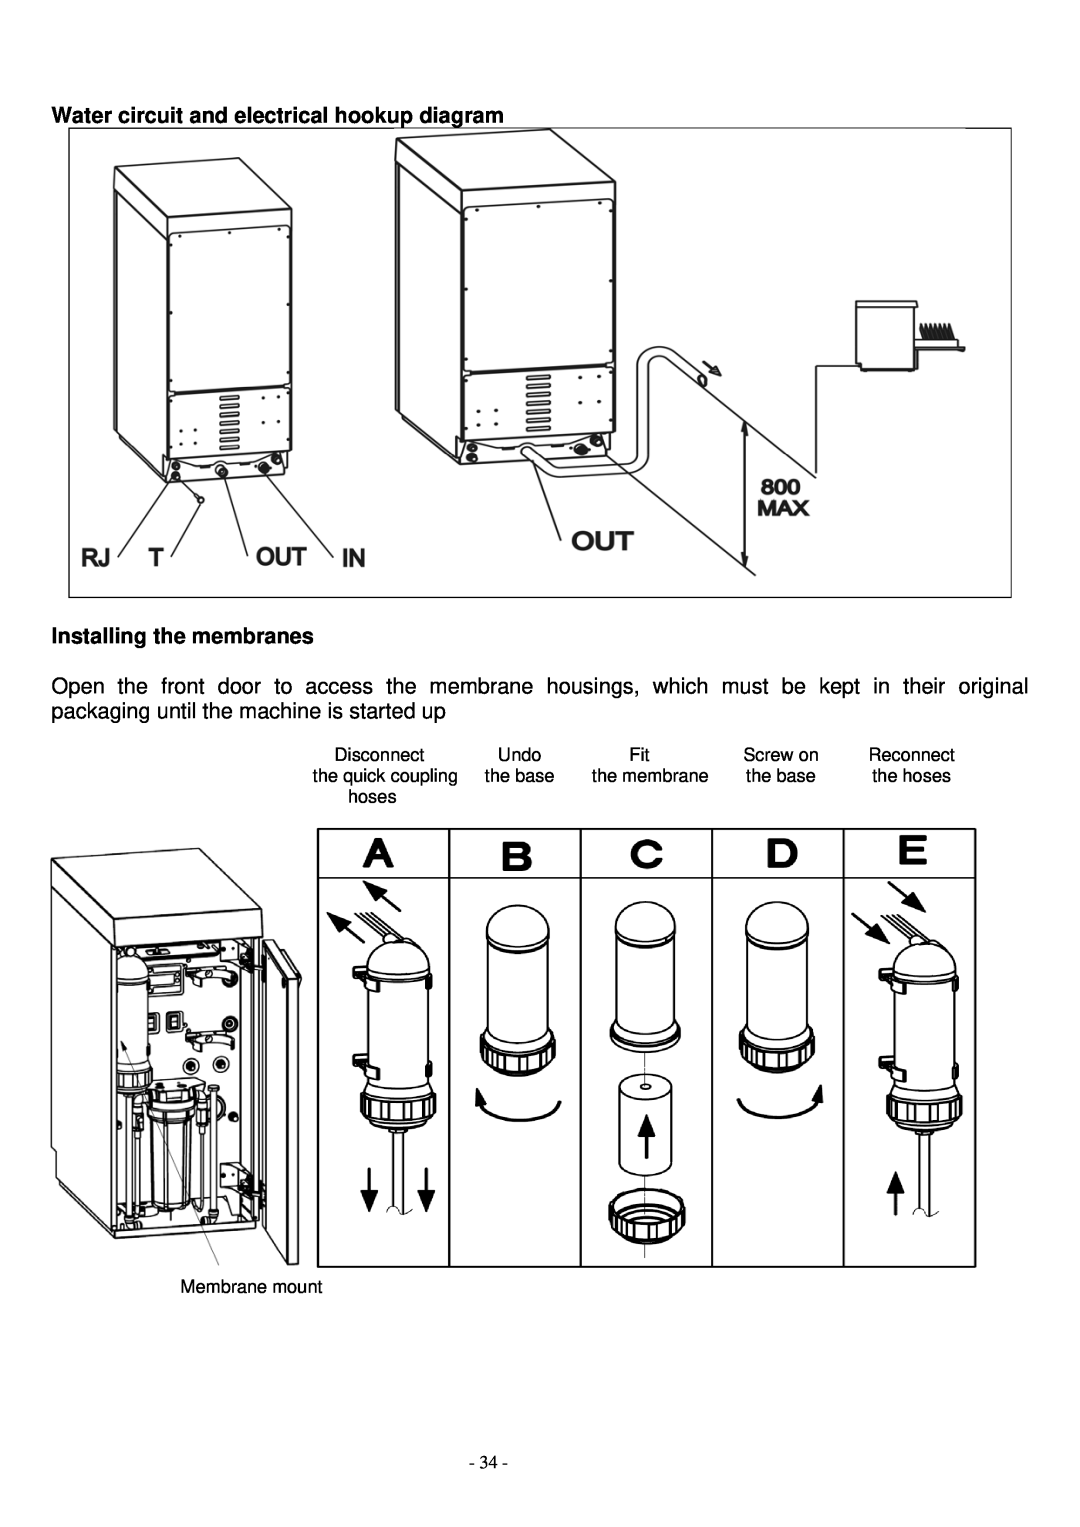 Smeg WO-01 manual Water circuit and electrical hookup diagram Installing the membranes 